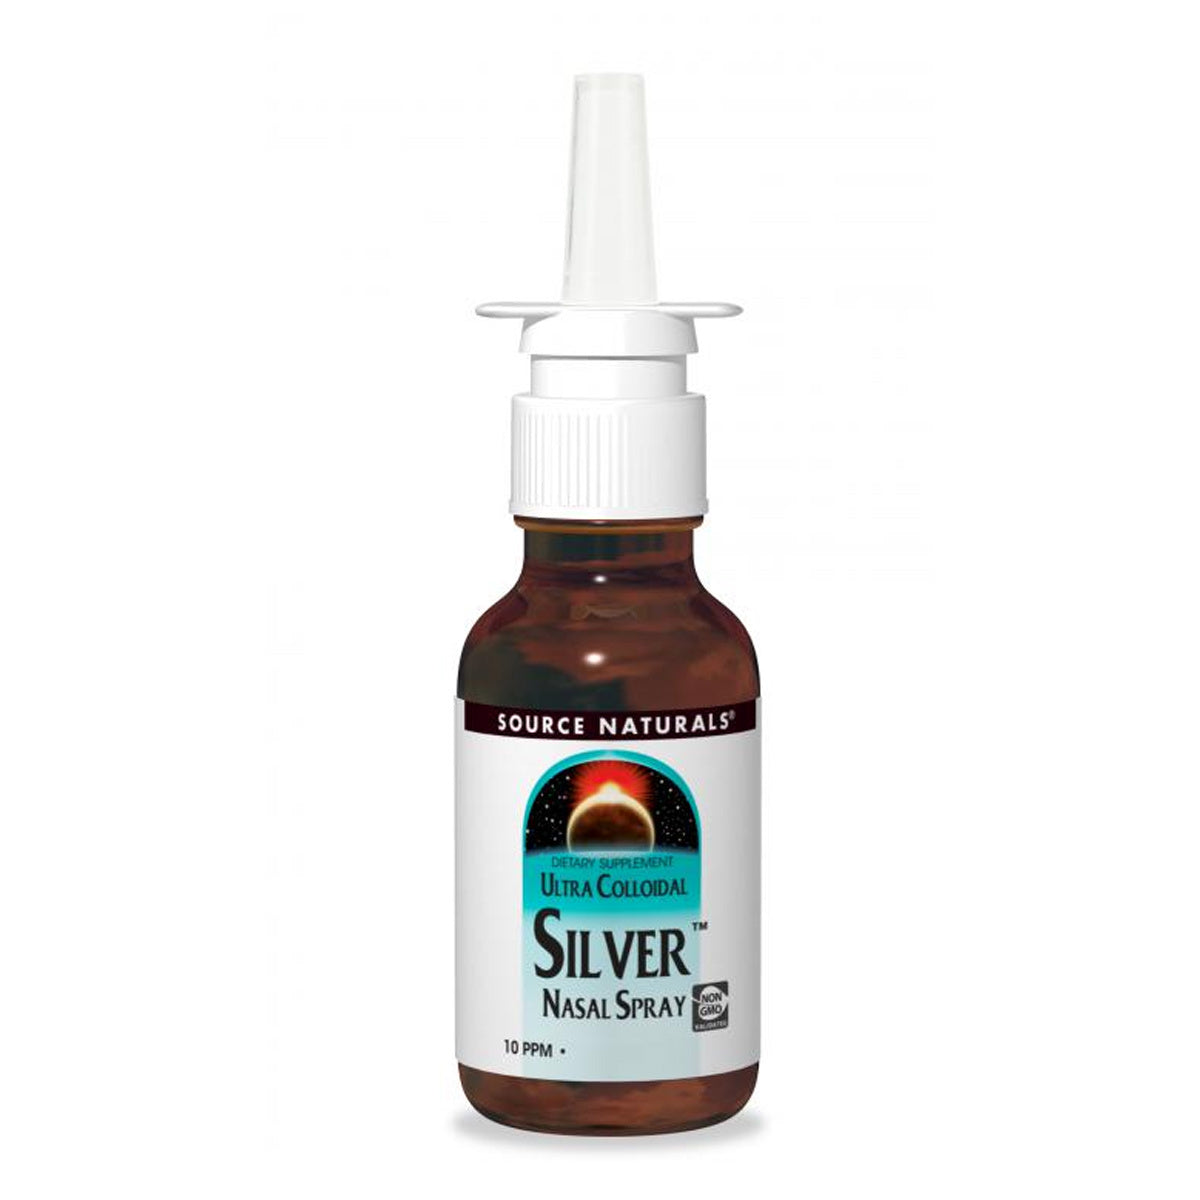 Primary image of Wellness Colloidal Silver Nasal Spray